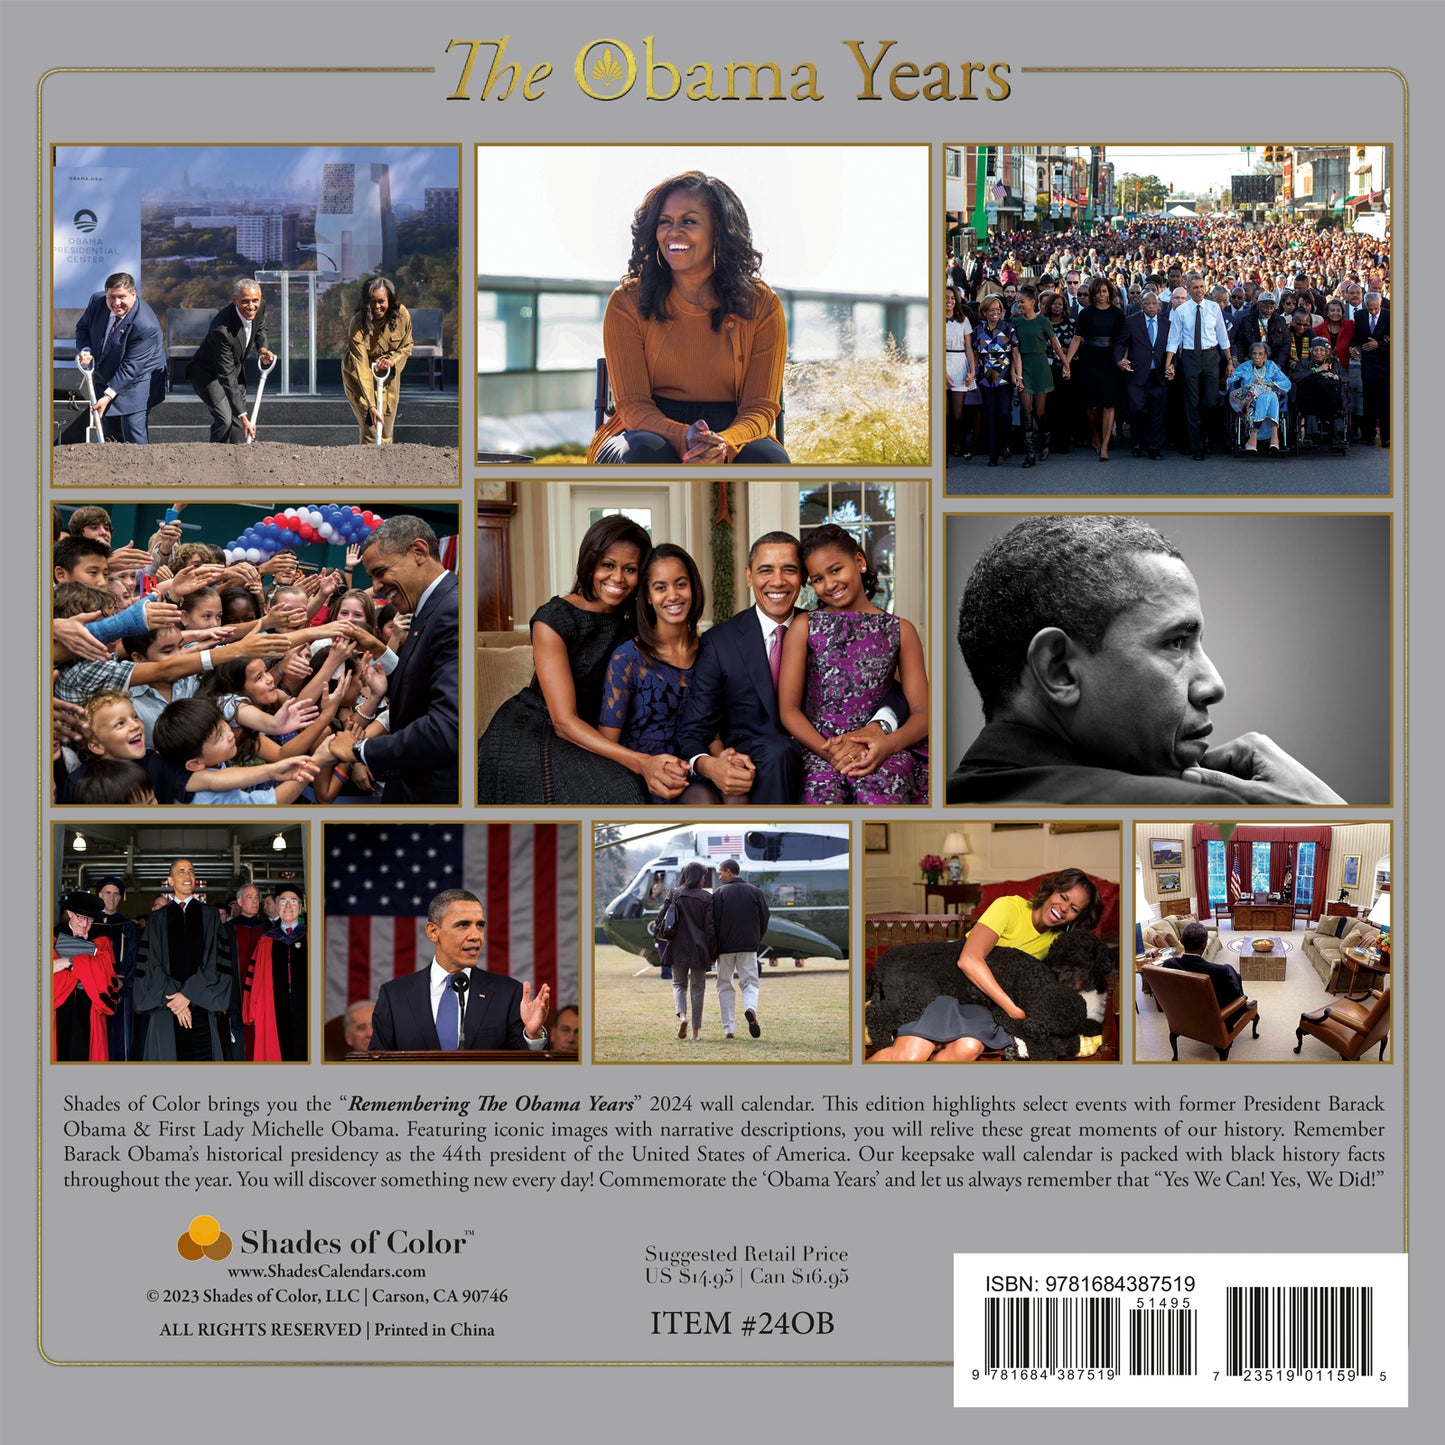 The Obama Years 2024 African American Wall Calendar